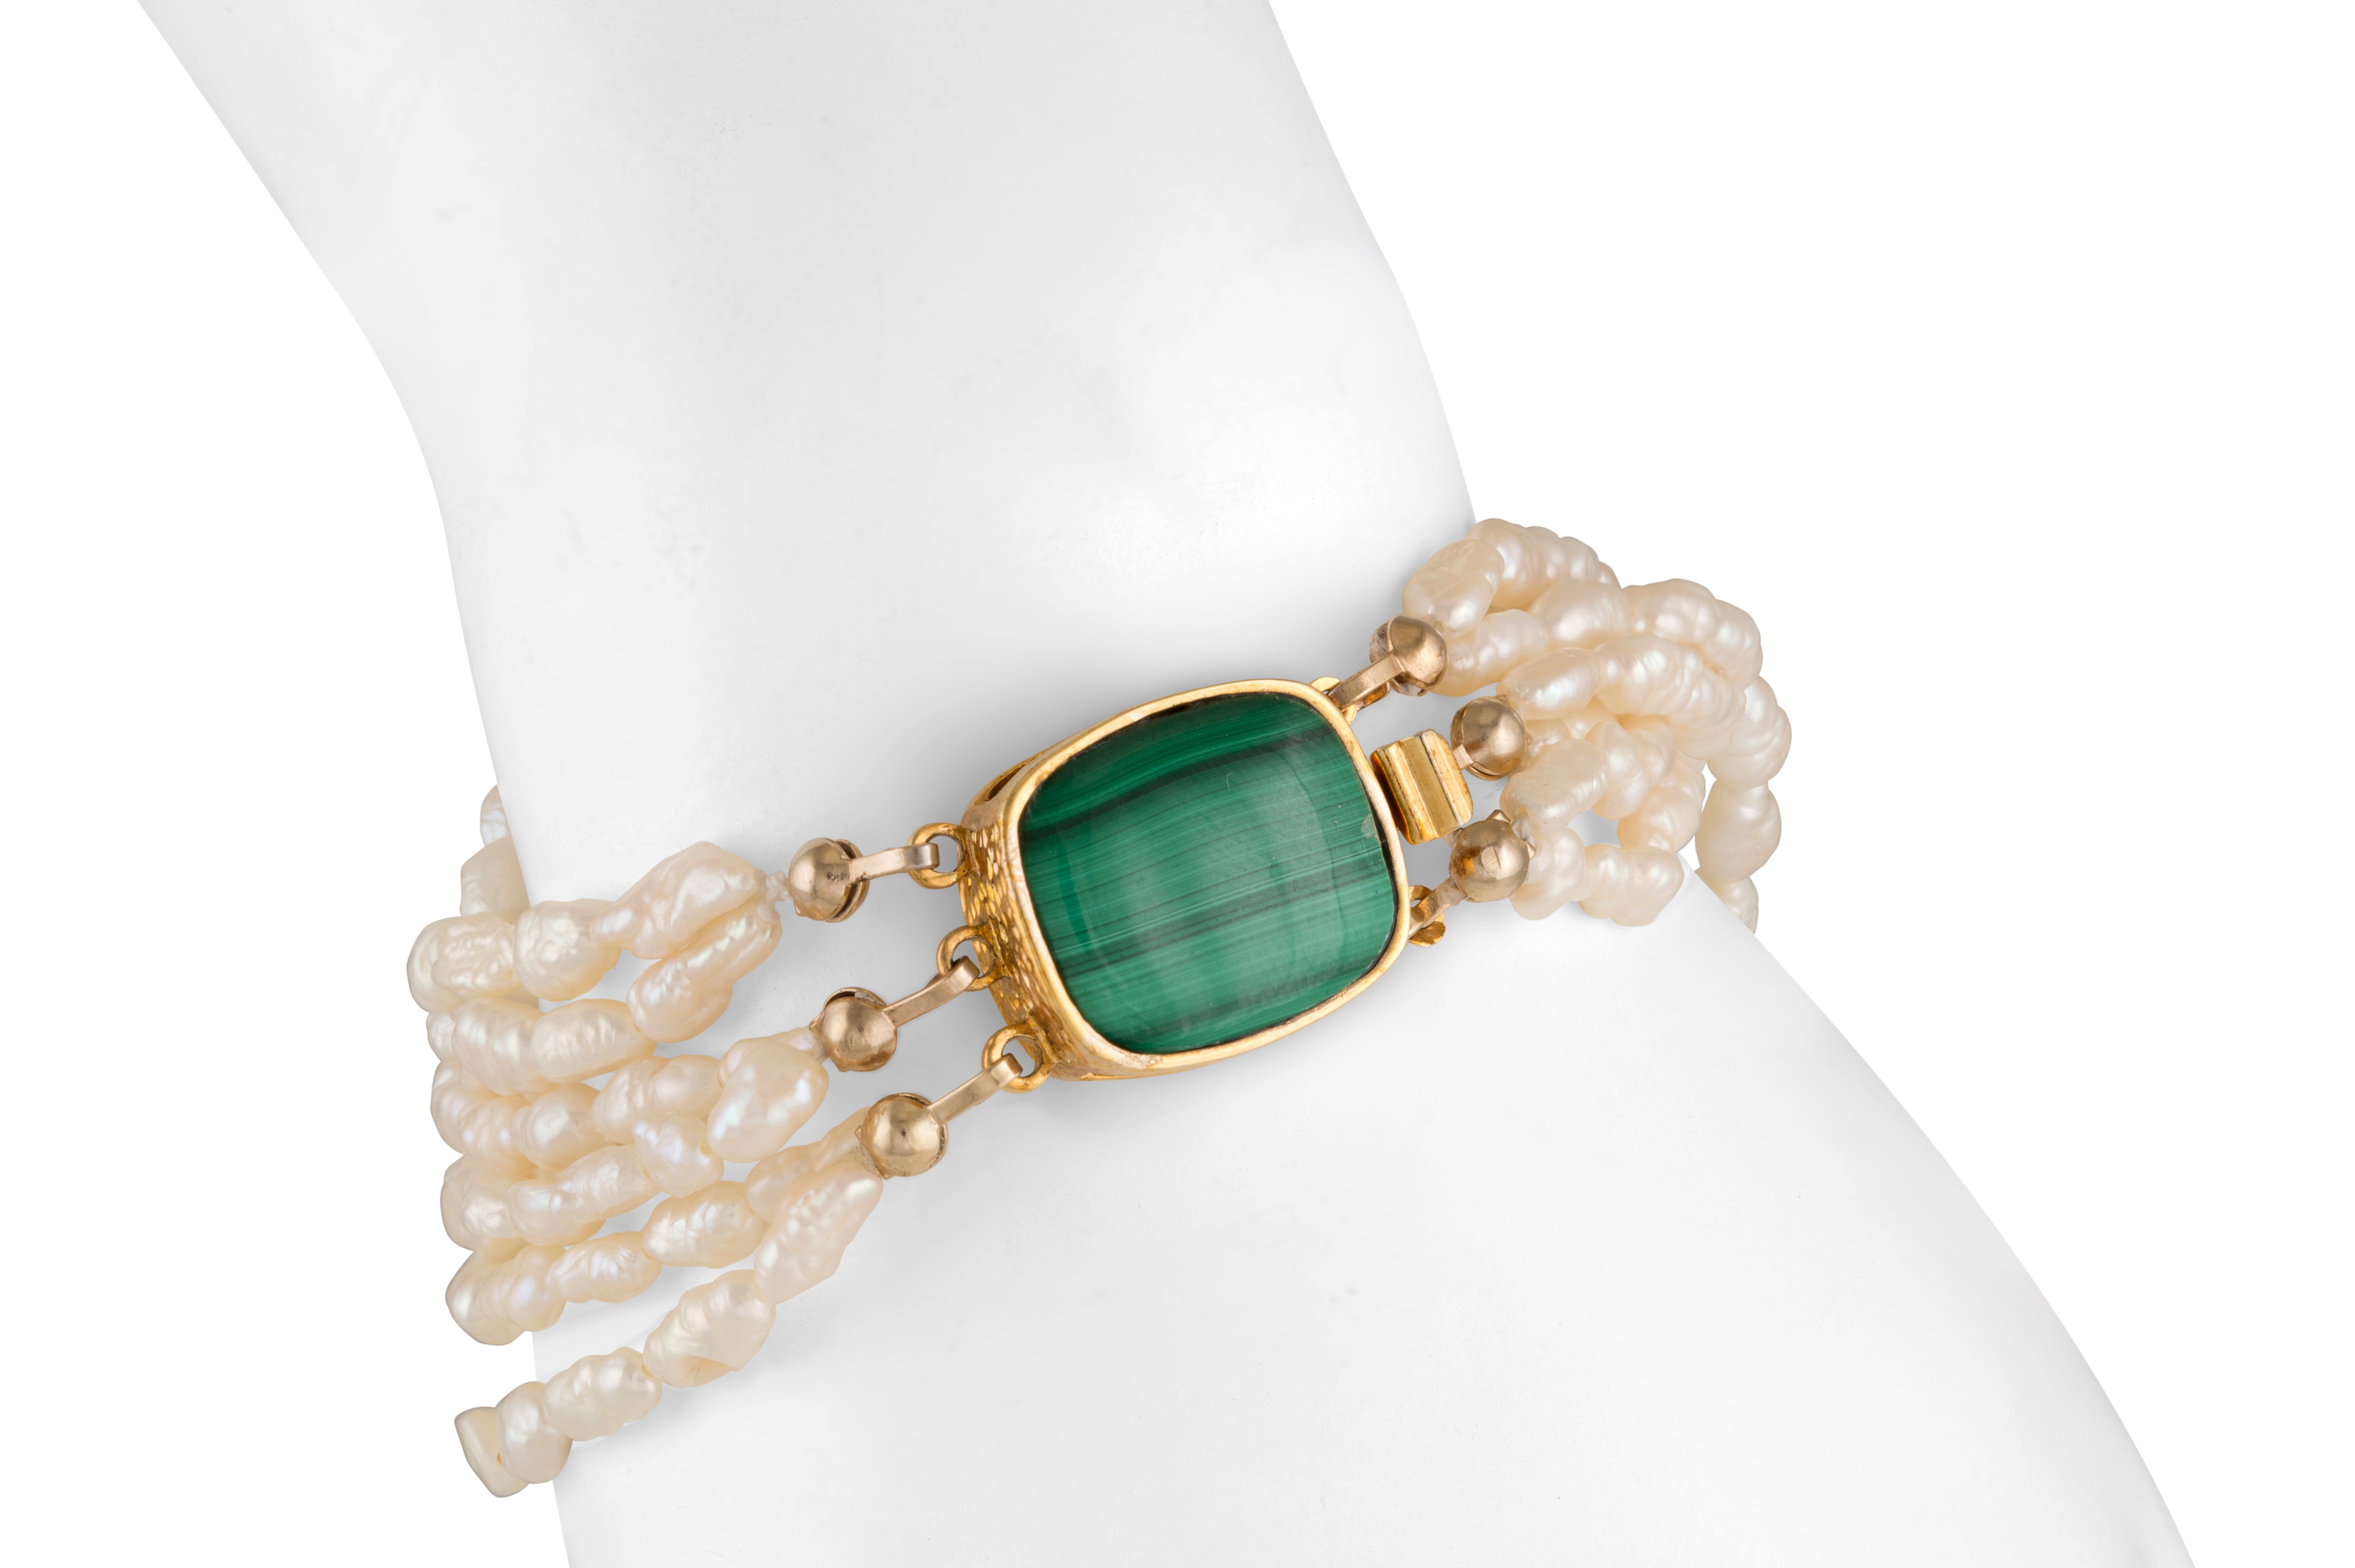 Estate pearl bracelet with a synthetic malachite worn on the wrist